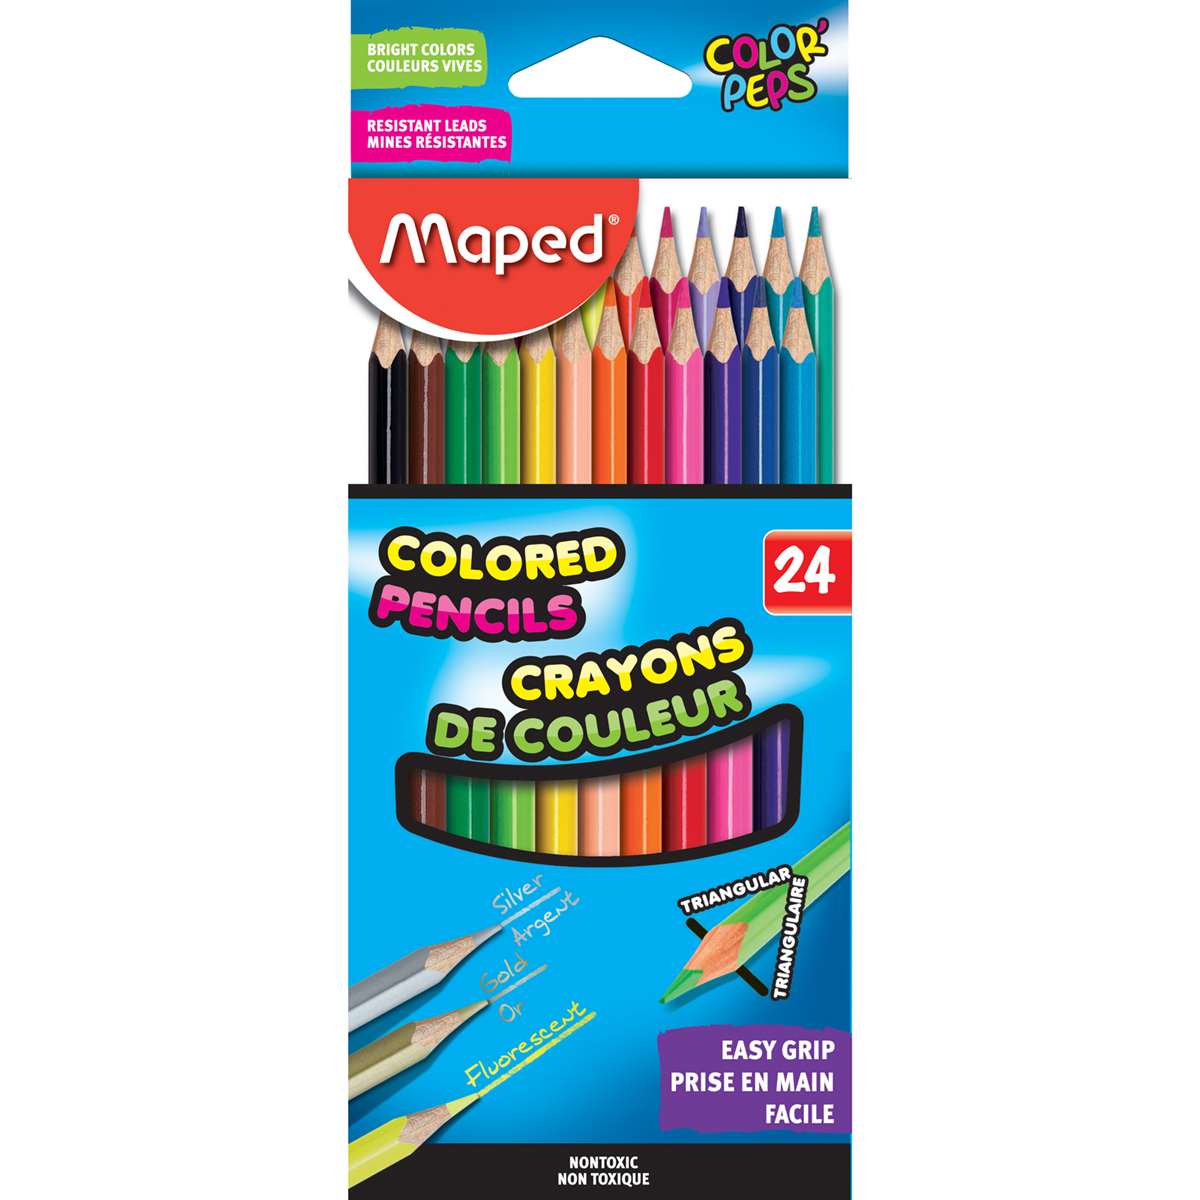 Triangular Crayons, Mixed Colored Crayon For Kids(24-colors